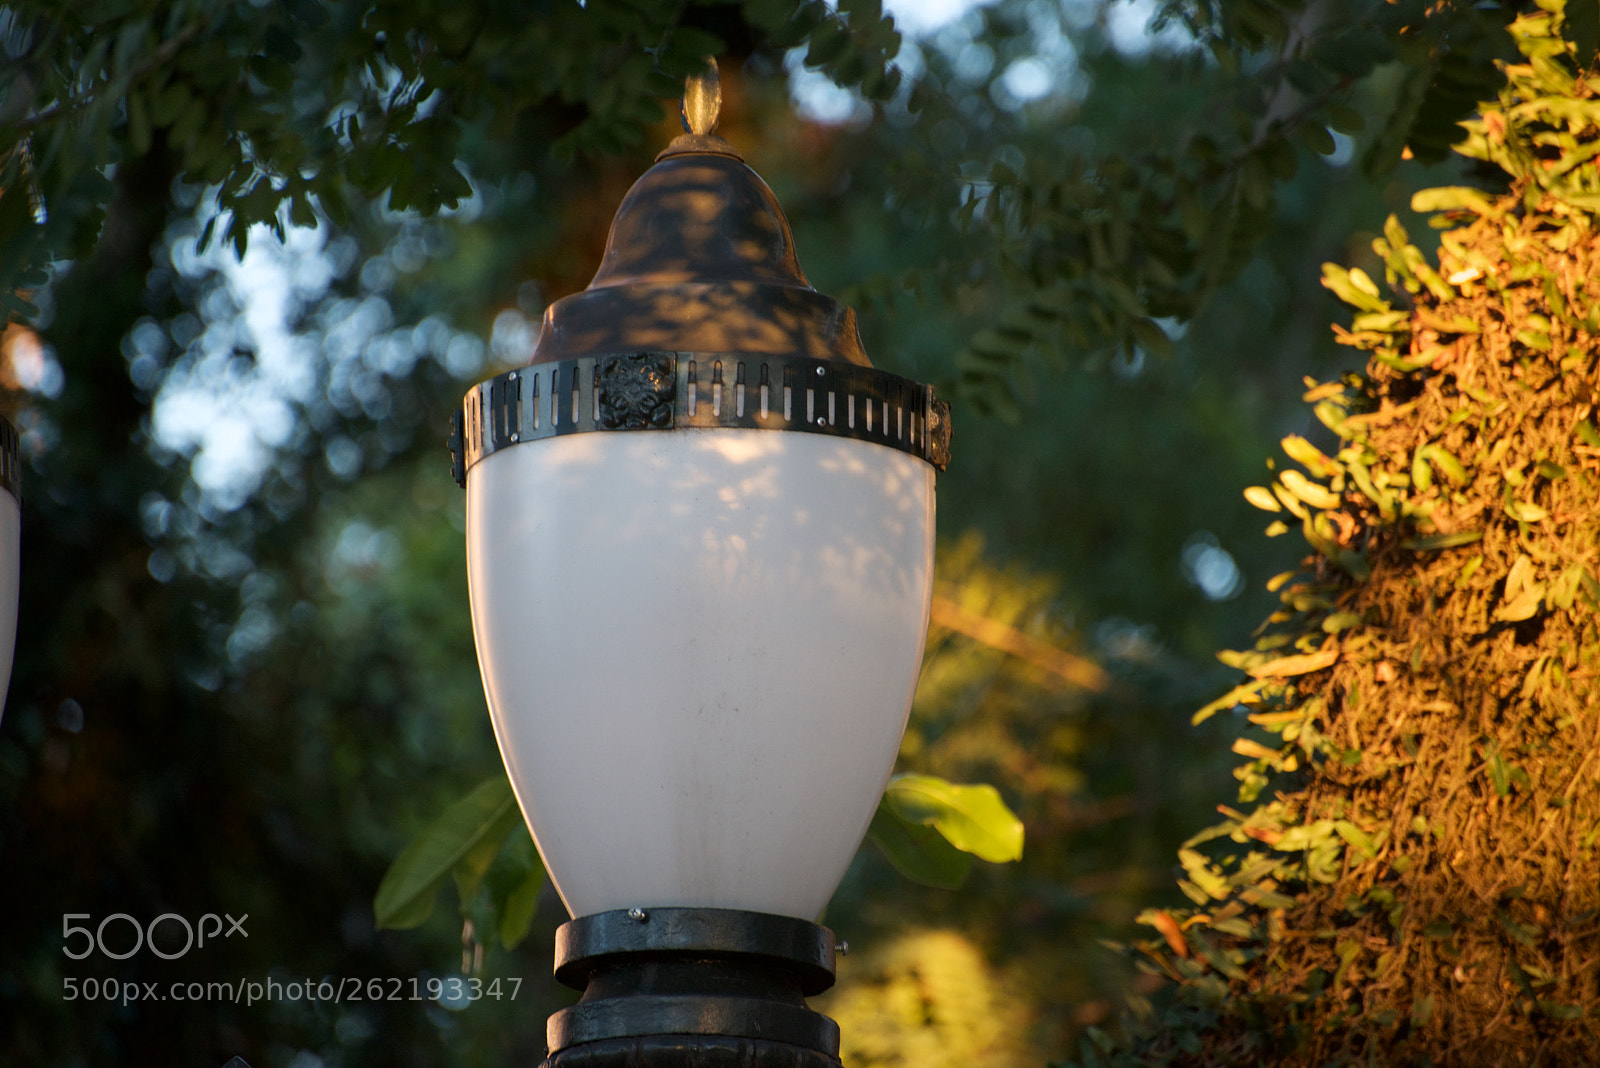 Nikon D610 sample photo. Old lamp in sunset photography